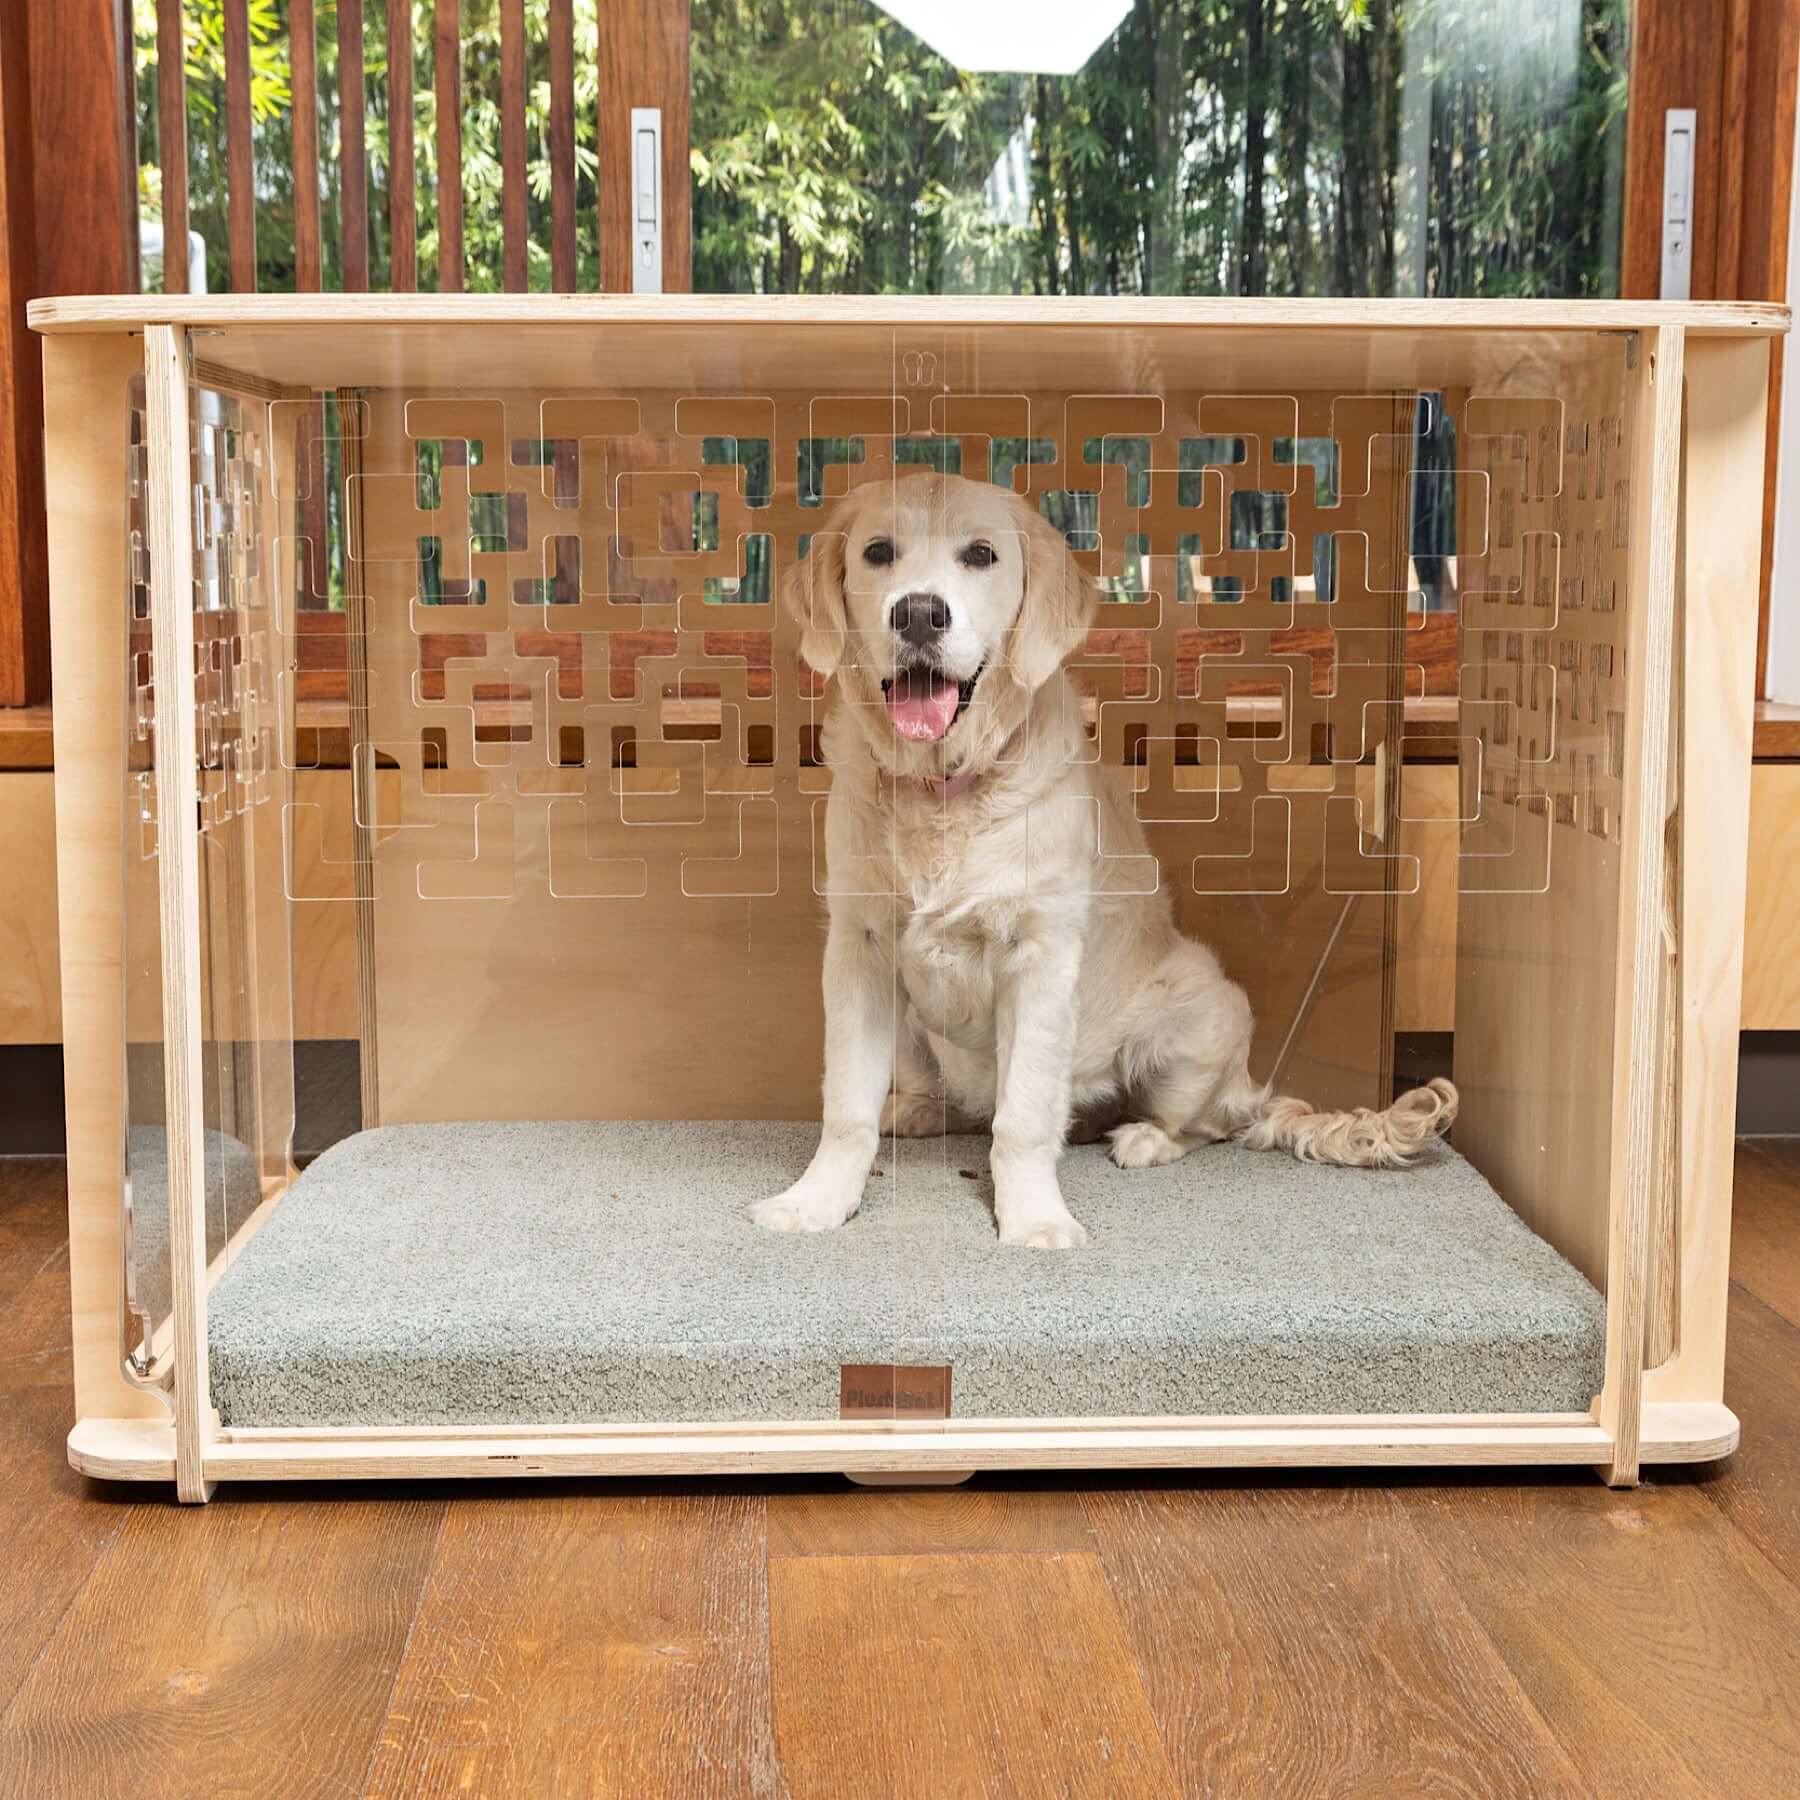 Golden Retriever sitting on orthopaedic mat inside the Harley Wooden Dog Crate